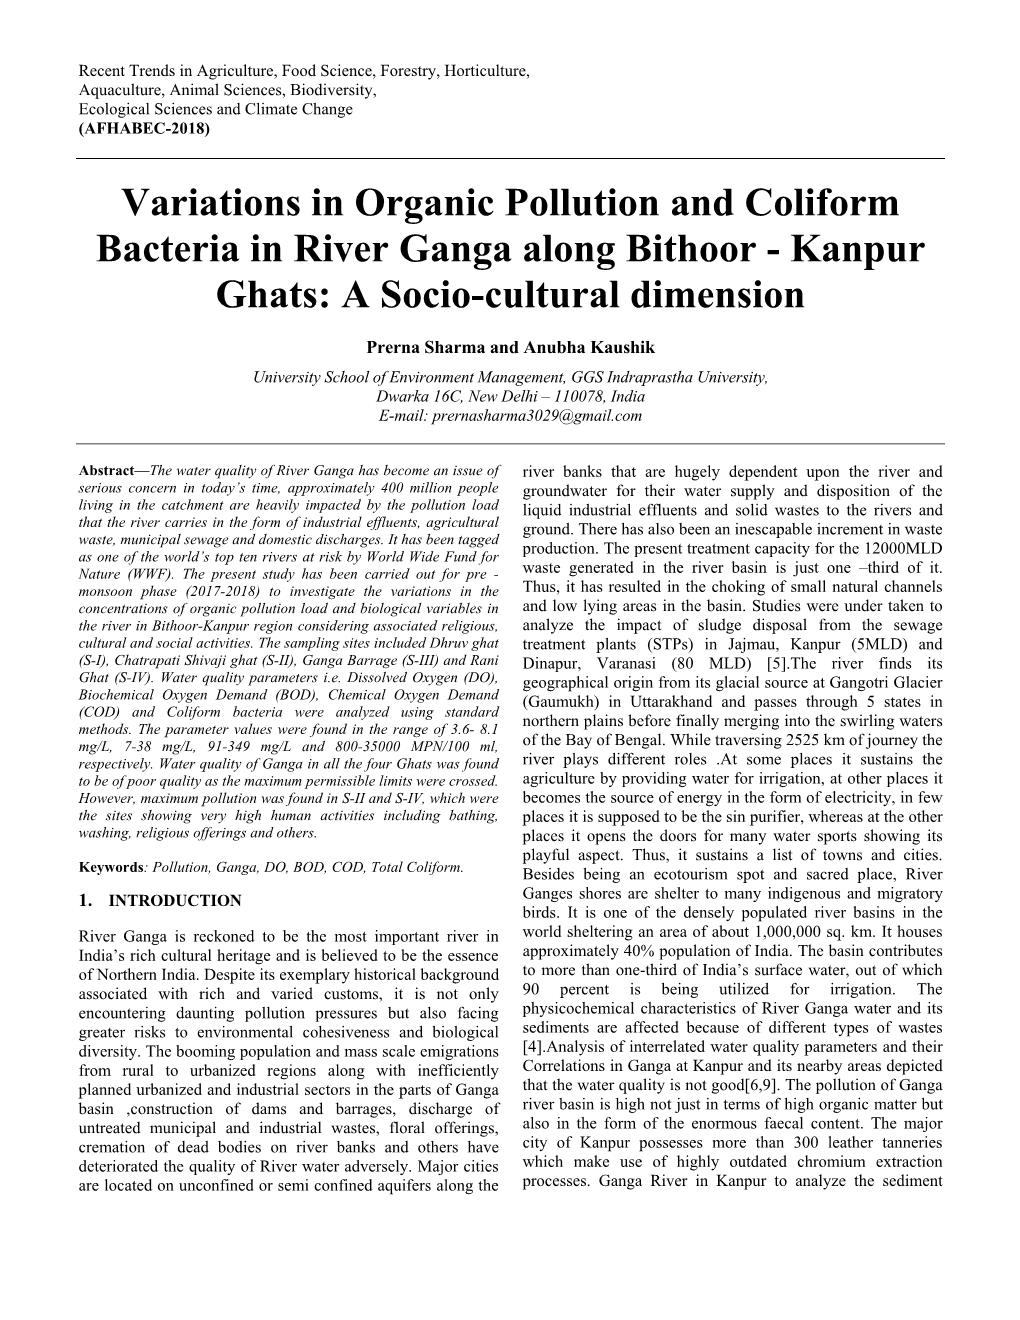 Variations in Organic Pollution and Coliform Bacteria in River Ganga Along Bithoor - Kanpur Ghats: a Socio-Cultural Dimension